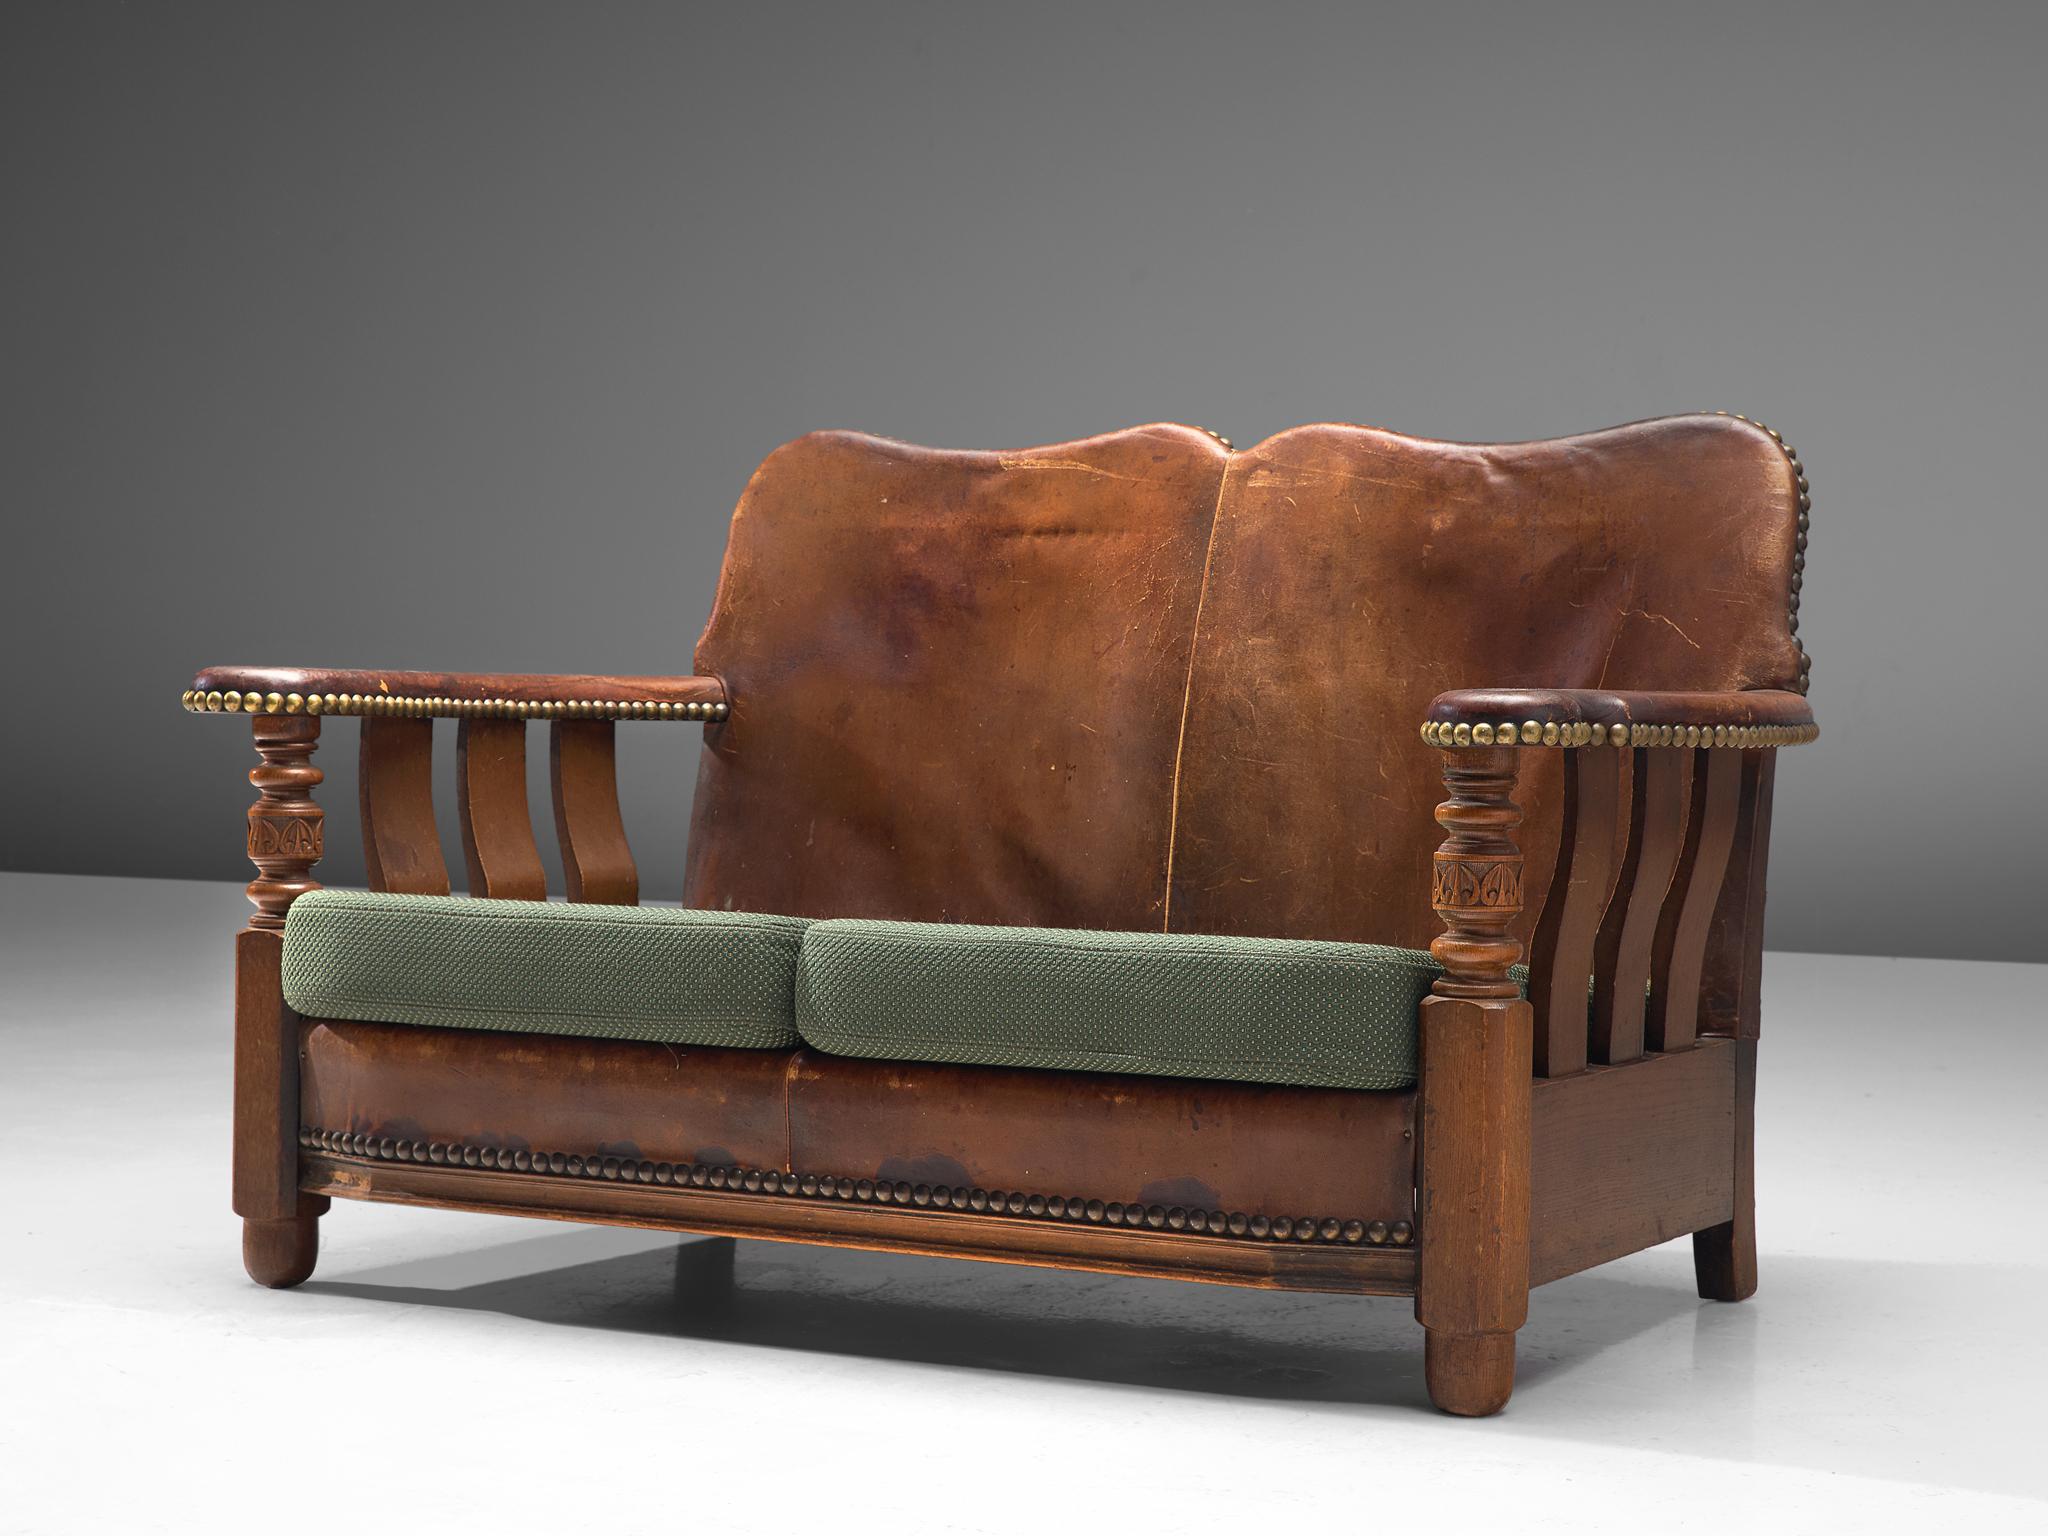 Settee sofa, wood, leather and fabric, Denmark, 1920s.

Exceptional example of early Danish design is this settee with robust, bulky aesthetics. The frame of the settee is made of wood. The back and armrests are upholstered with nail fitted,